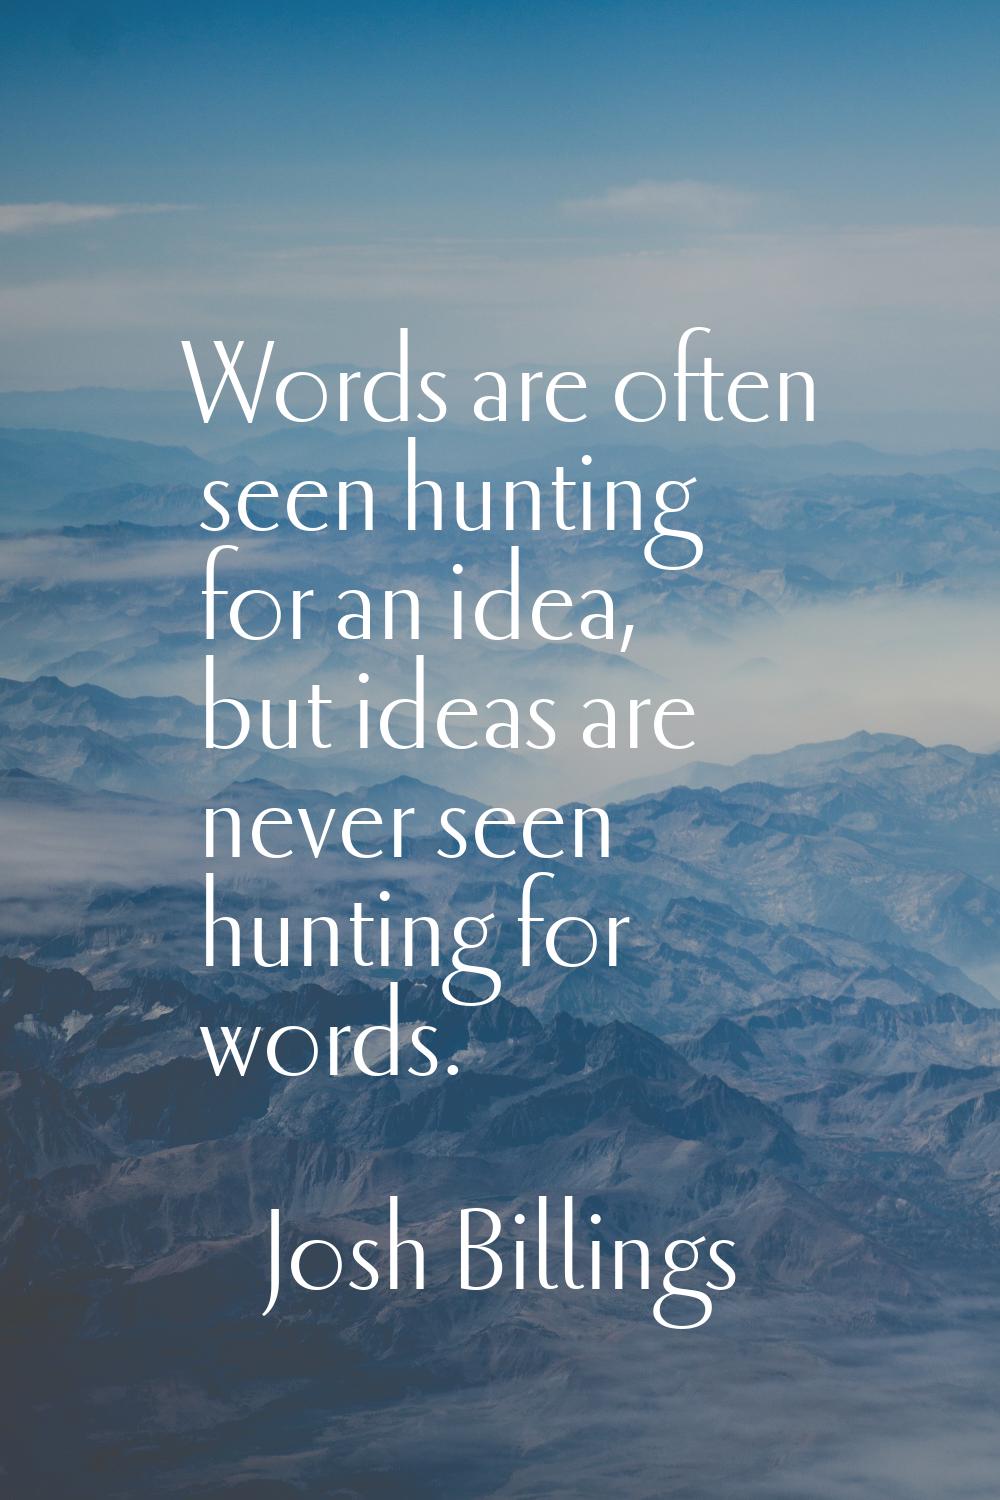 Words are often seen hunting for an idea, but ideas are never seen hunting for words.